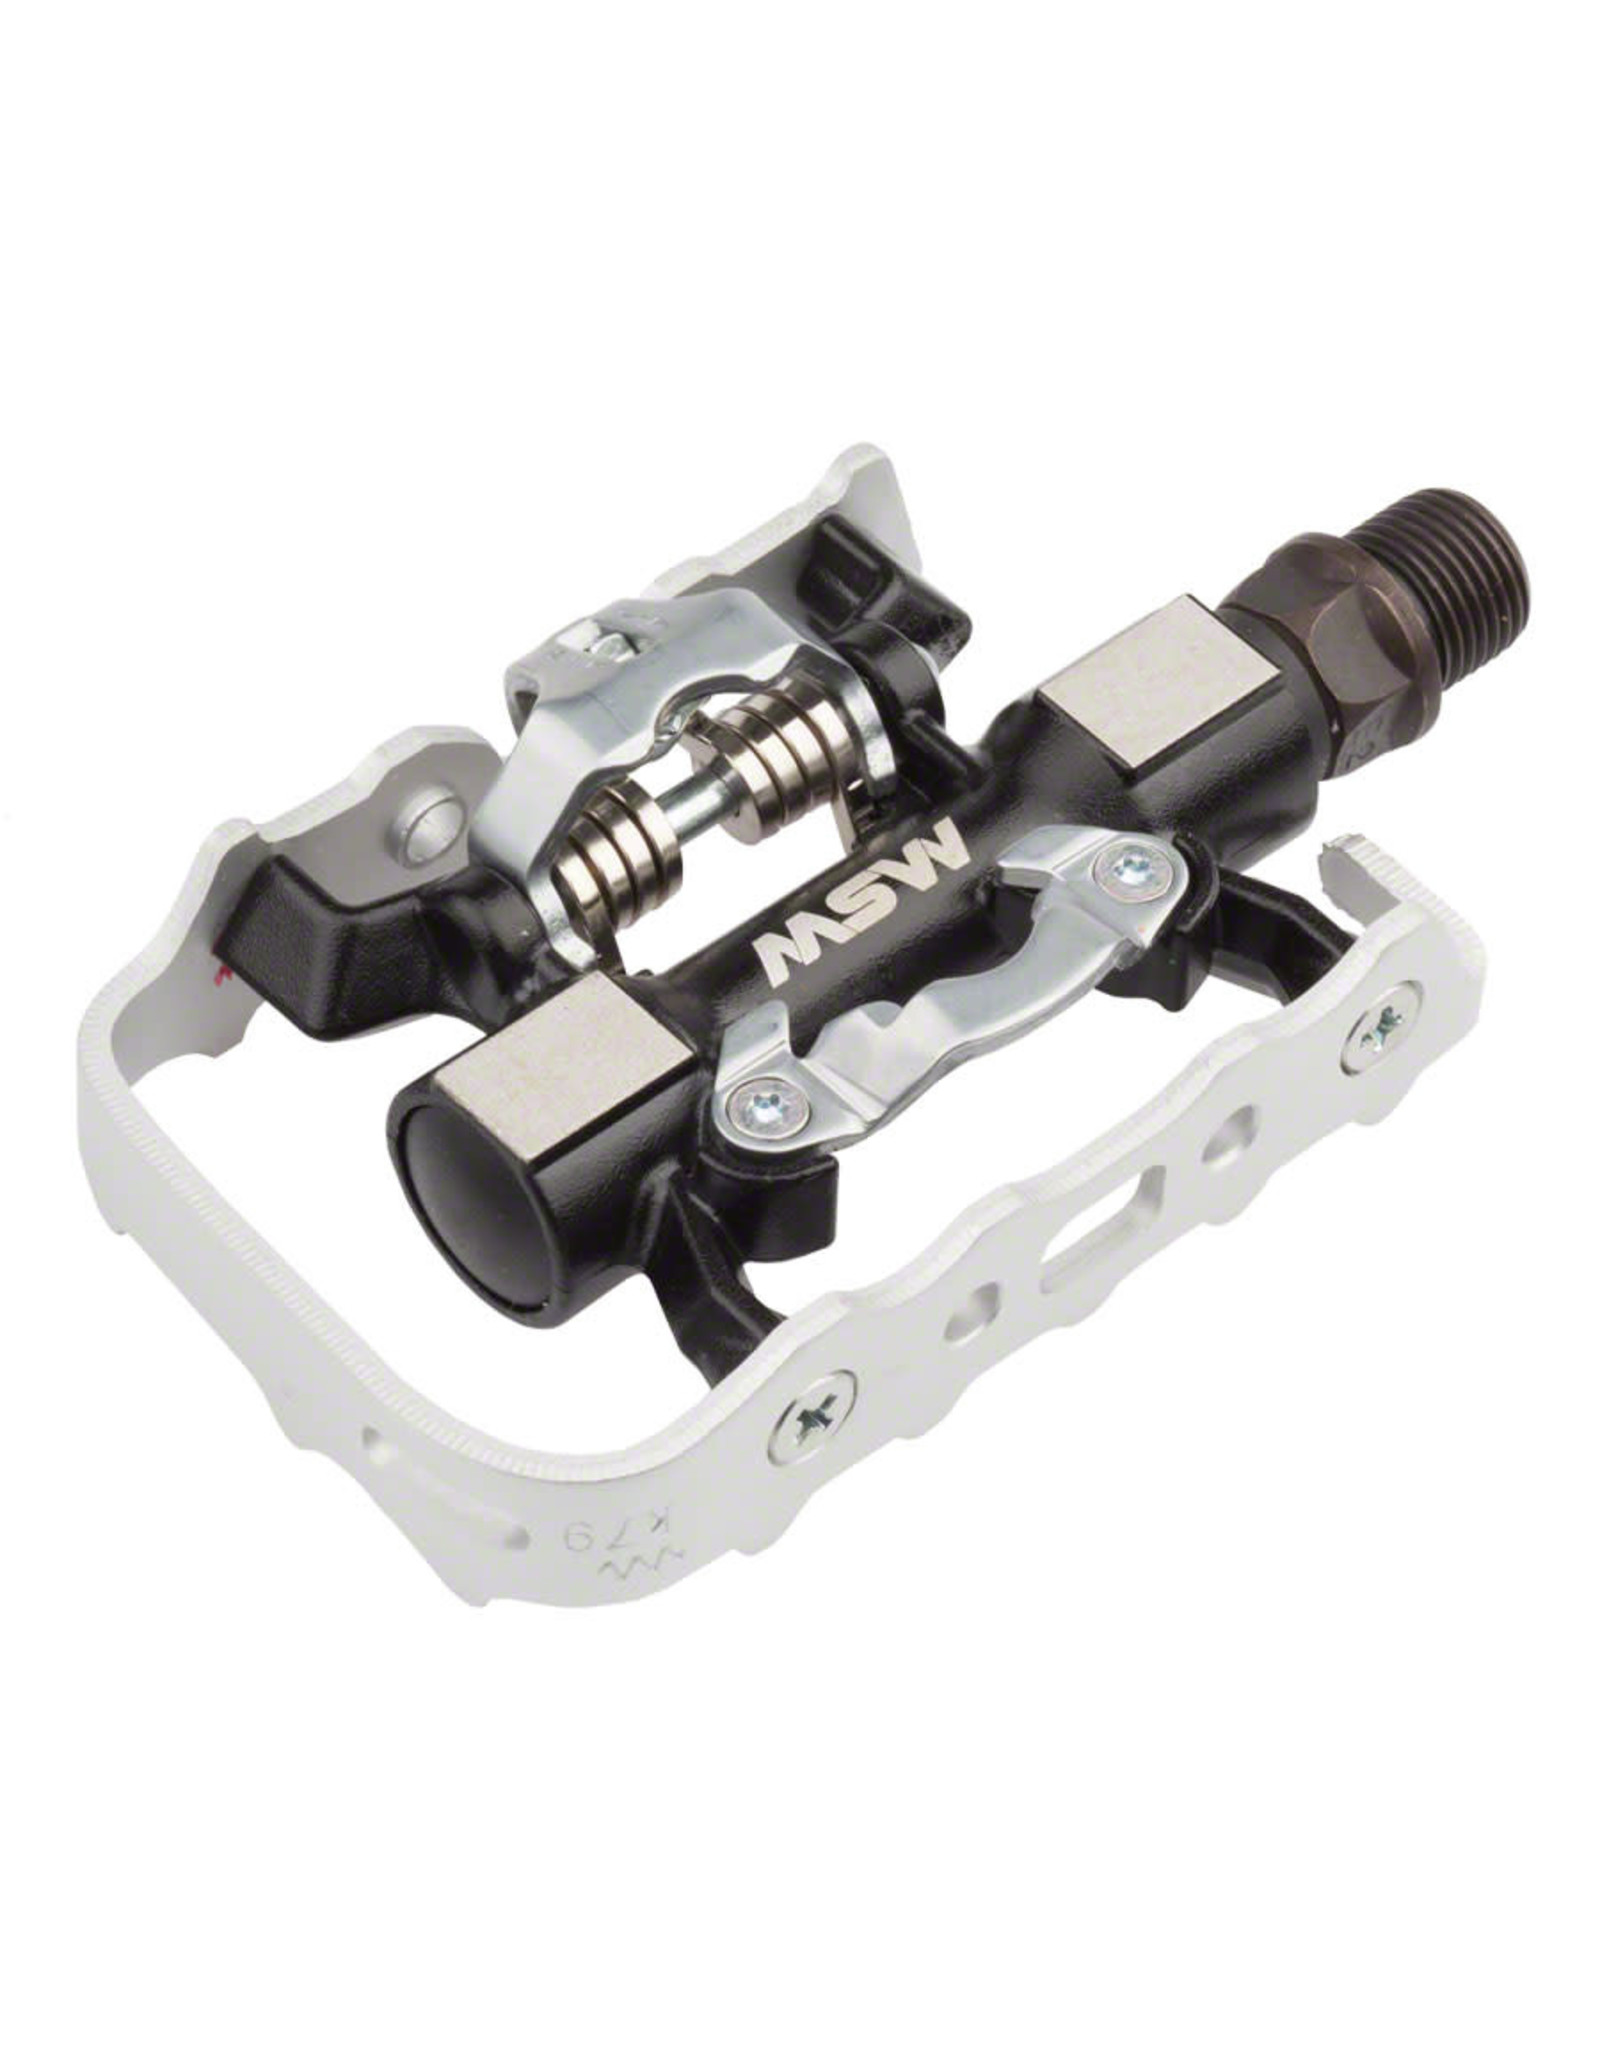 MSW CP-100 Pedals - Single Side Clipless with Platform Aluminum 9/16" Black/Silver